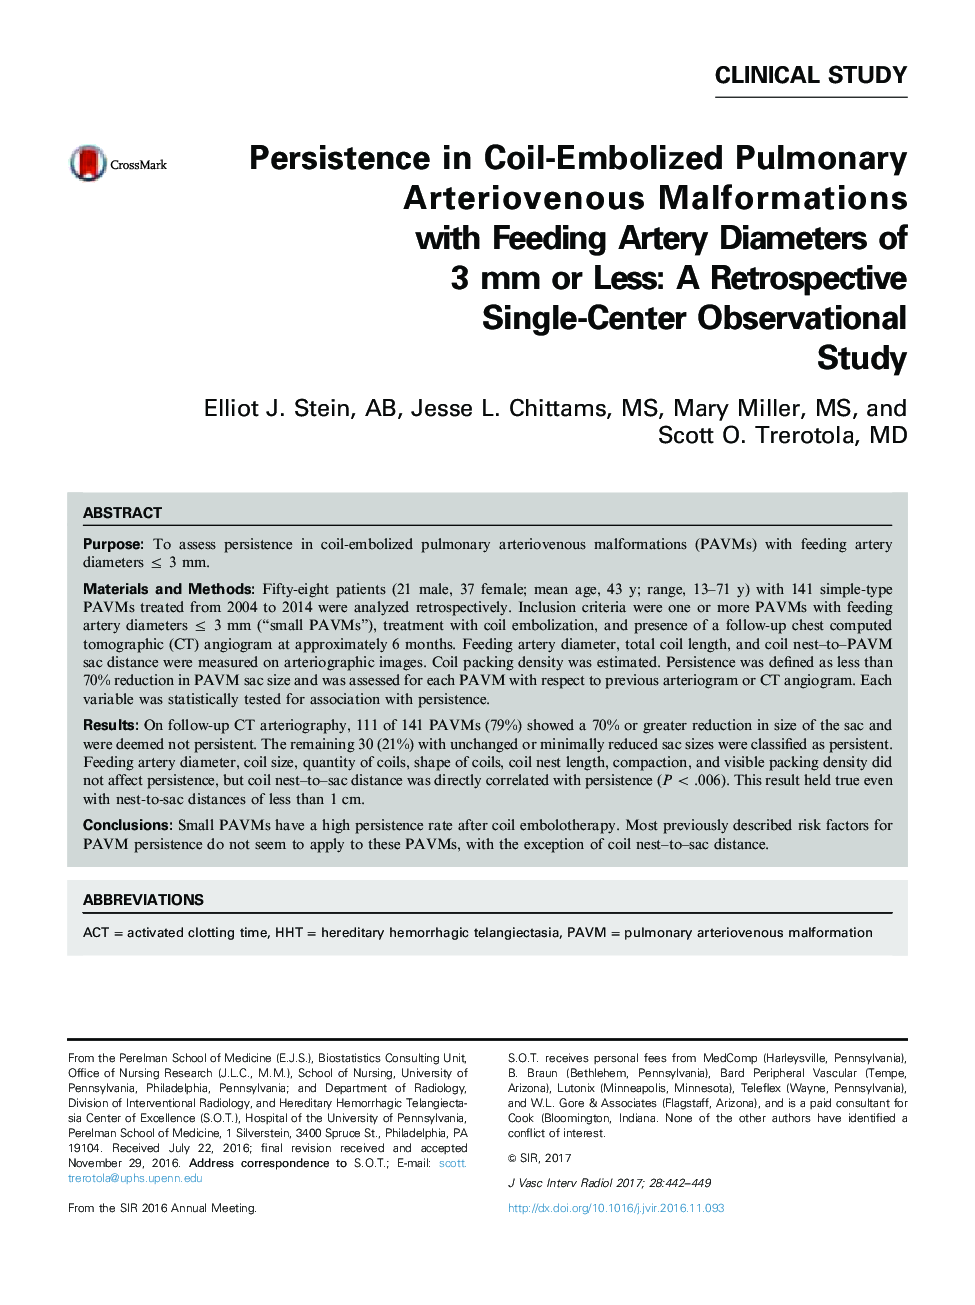 Persistence in Coil-Embolized Pulmonary Arteriovenous Malformations with Feeding Artery Diameters of 3 mm or Less: A Retrospective Single-Center Observational Study